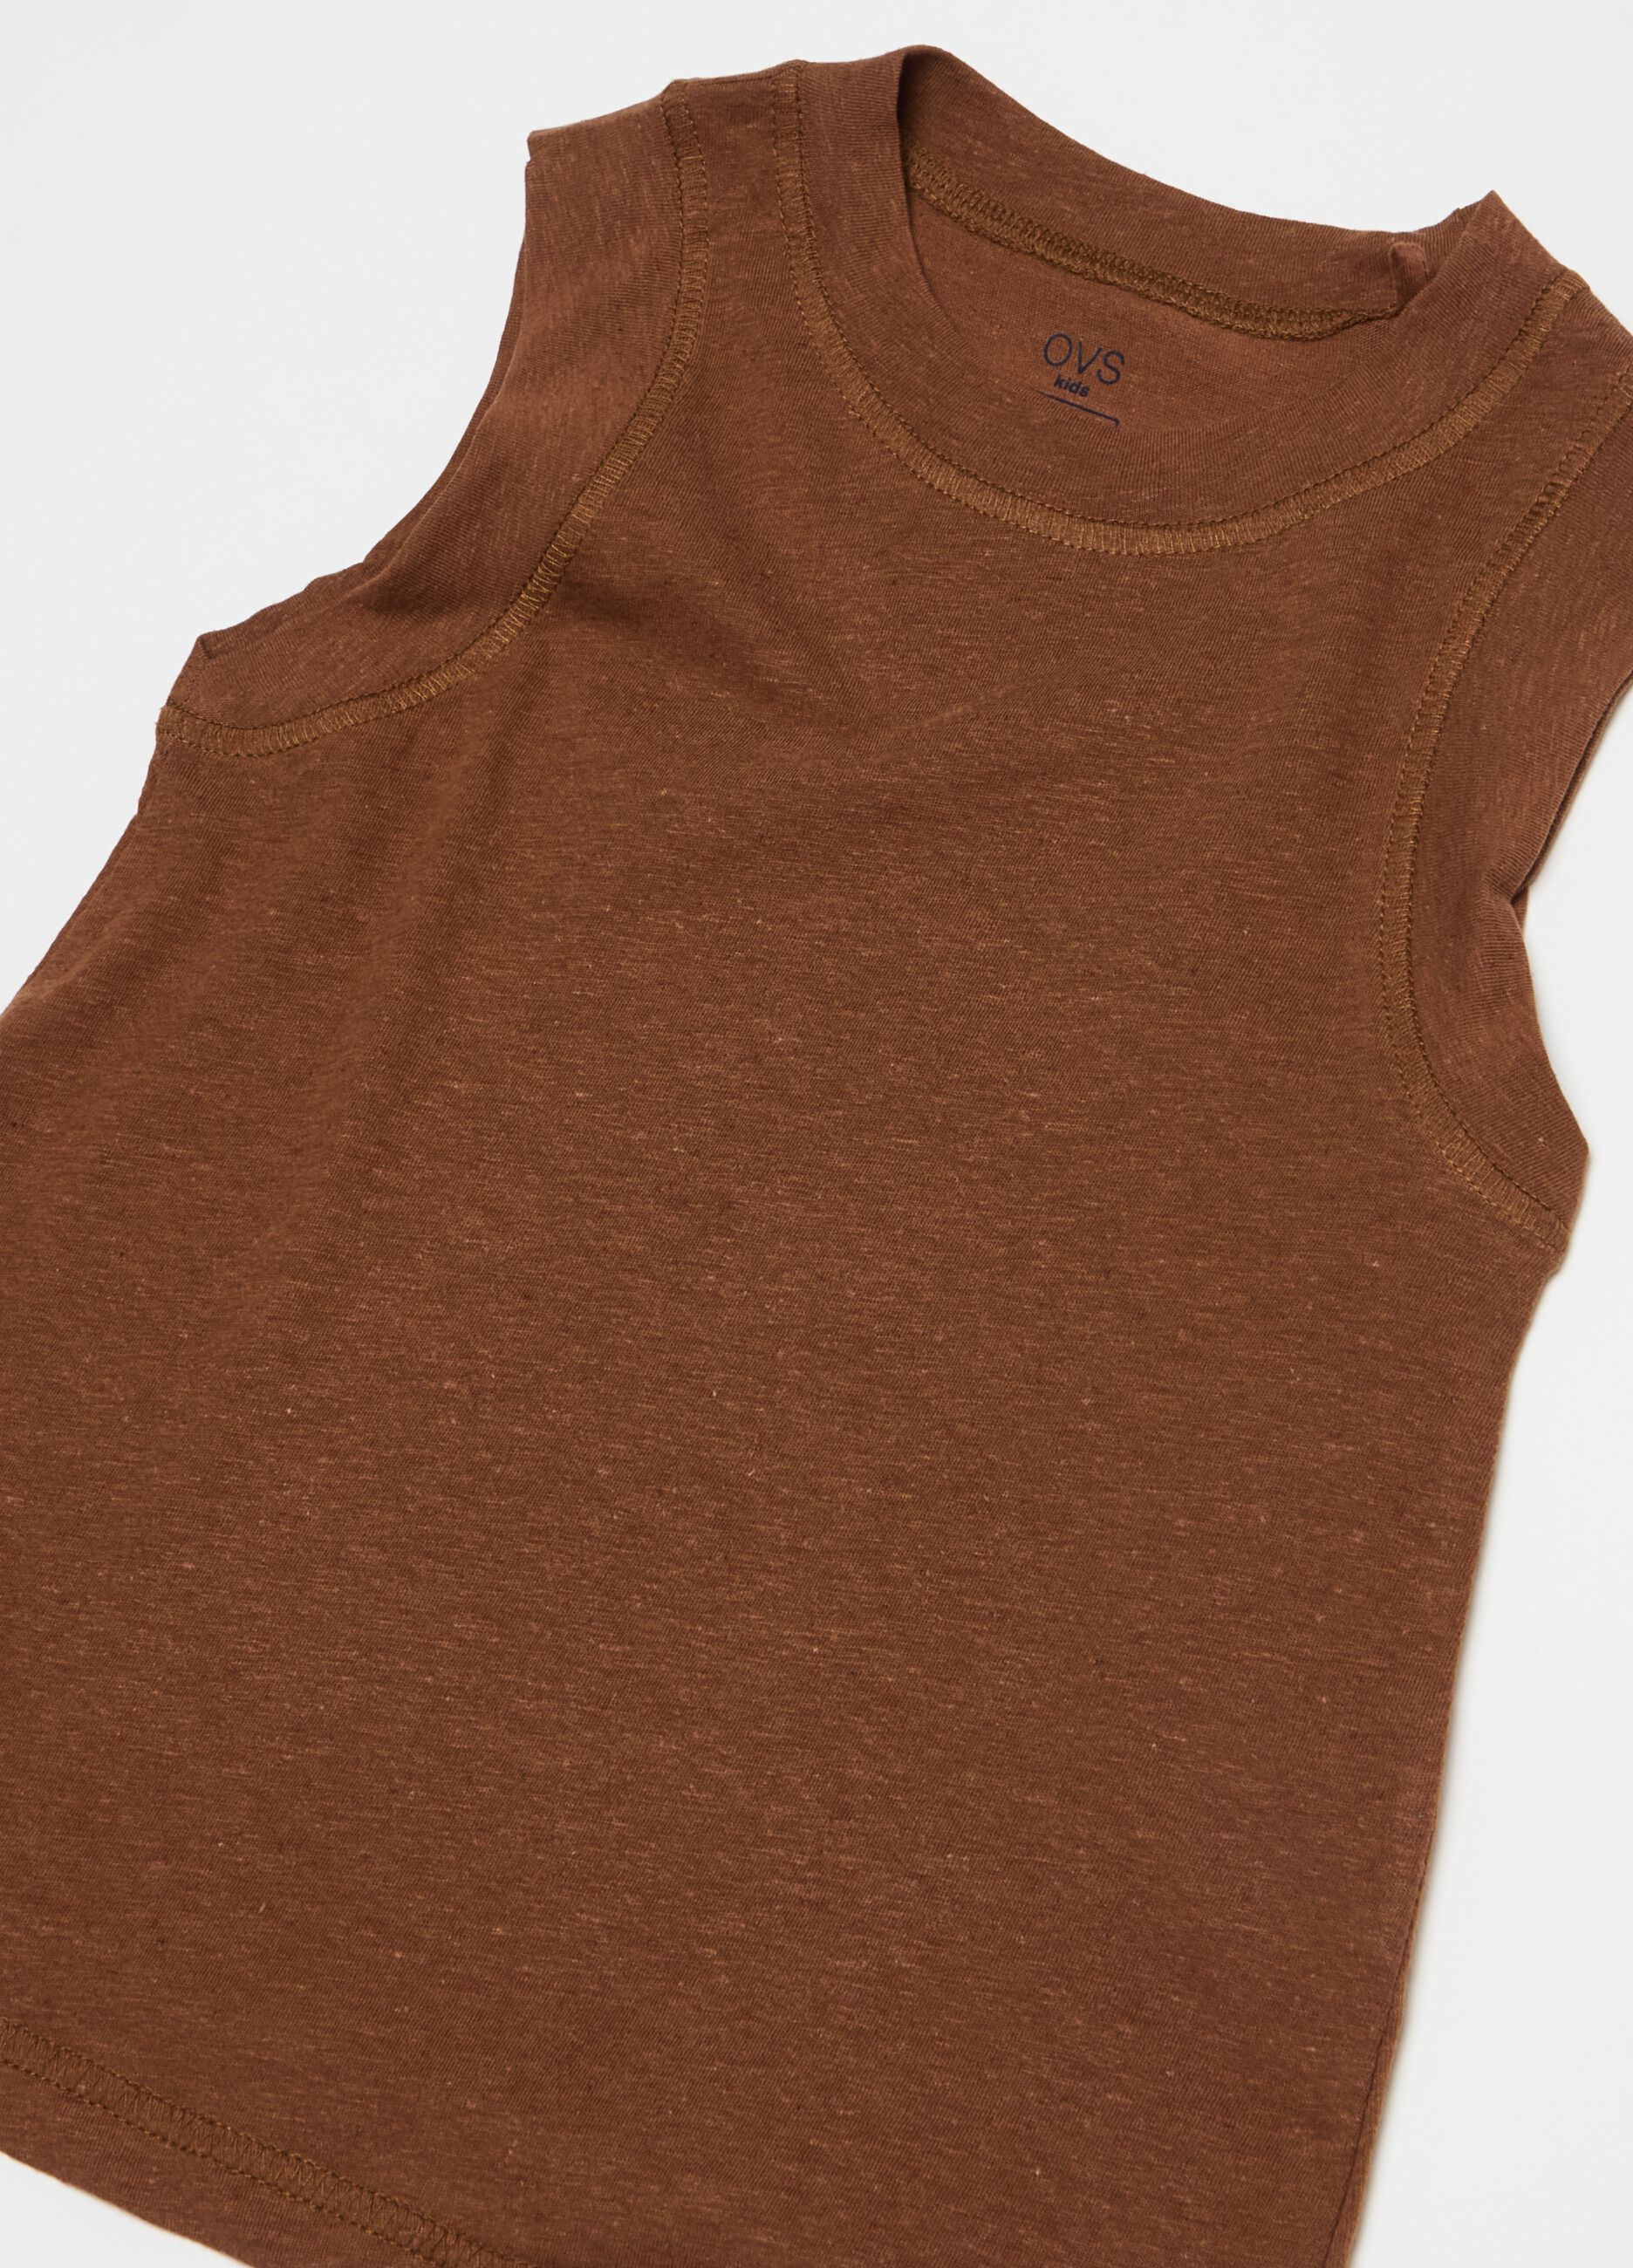 Cotton and linen tank top